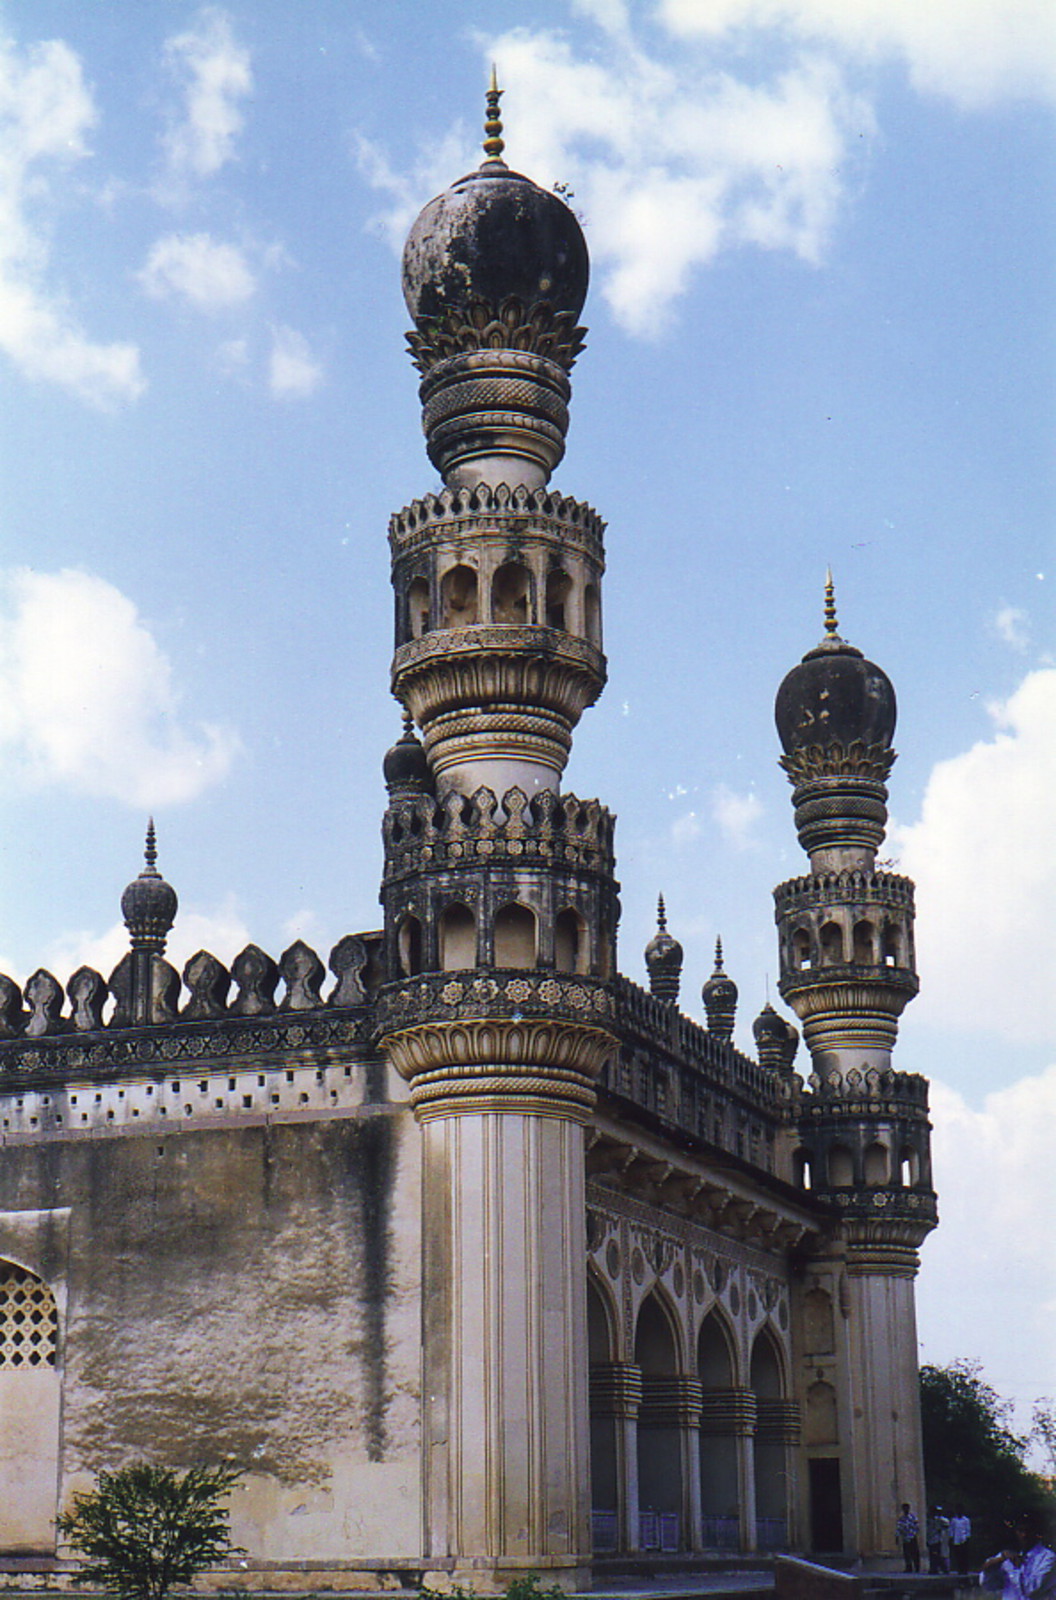 The minarets on the tomb of Sultan Mohammed Quli